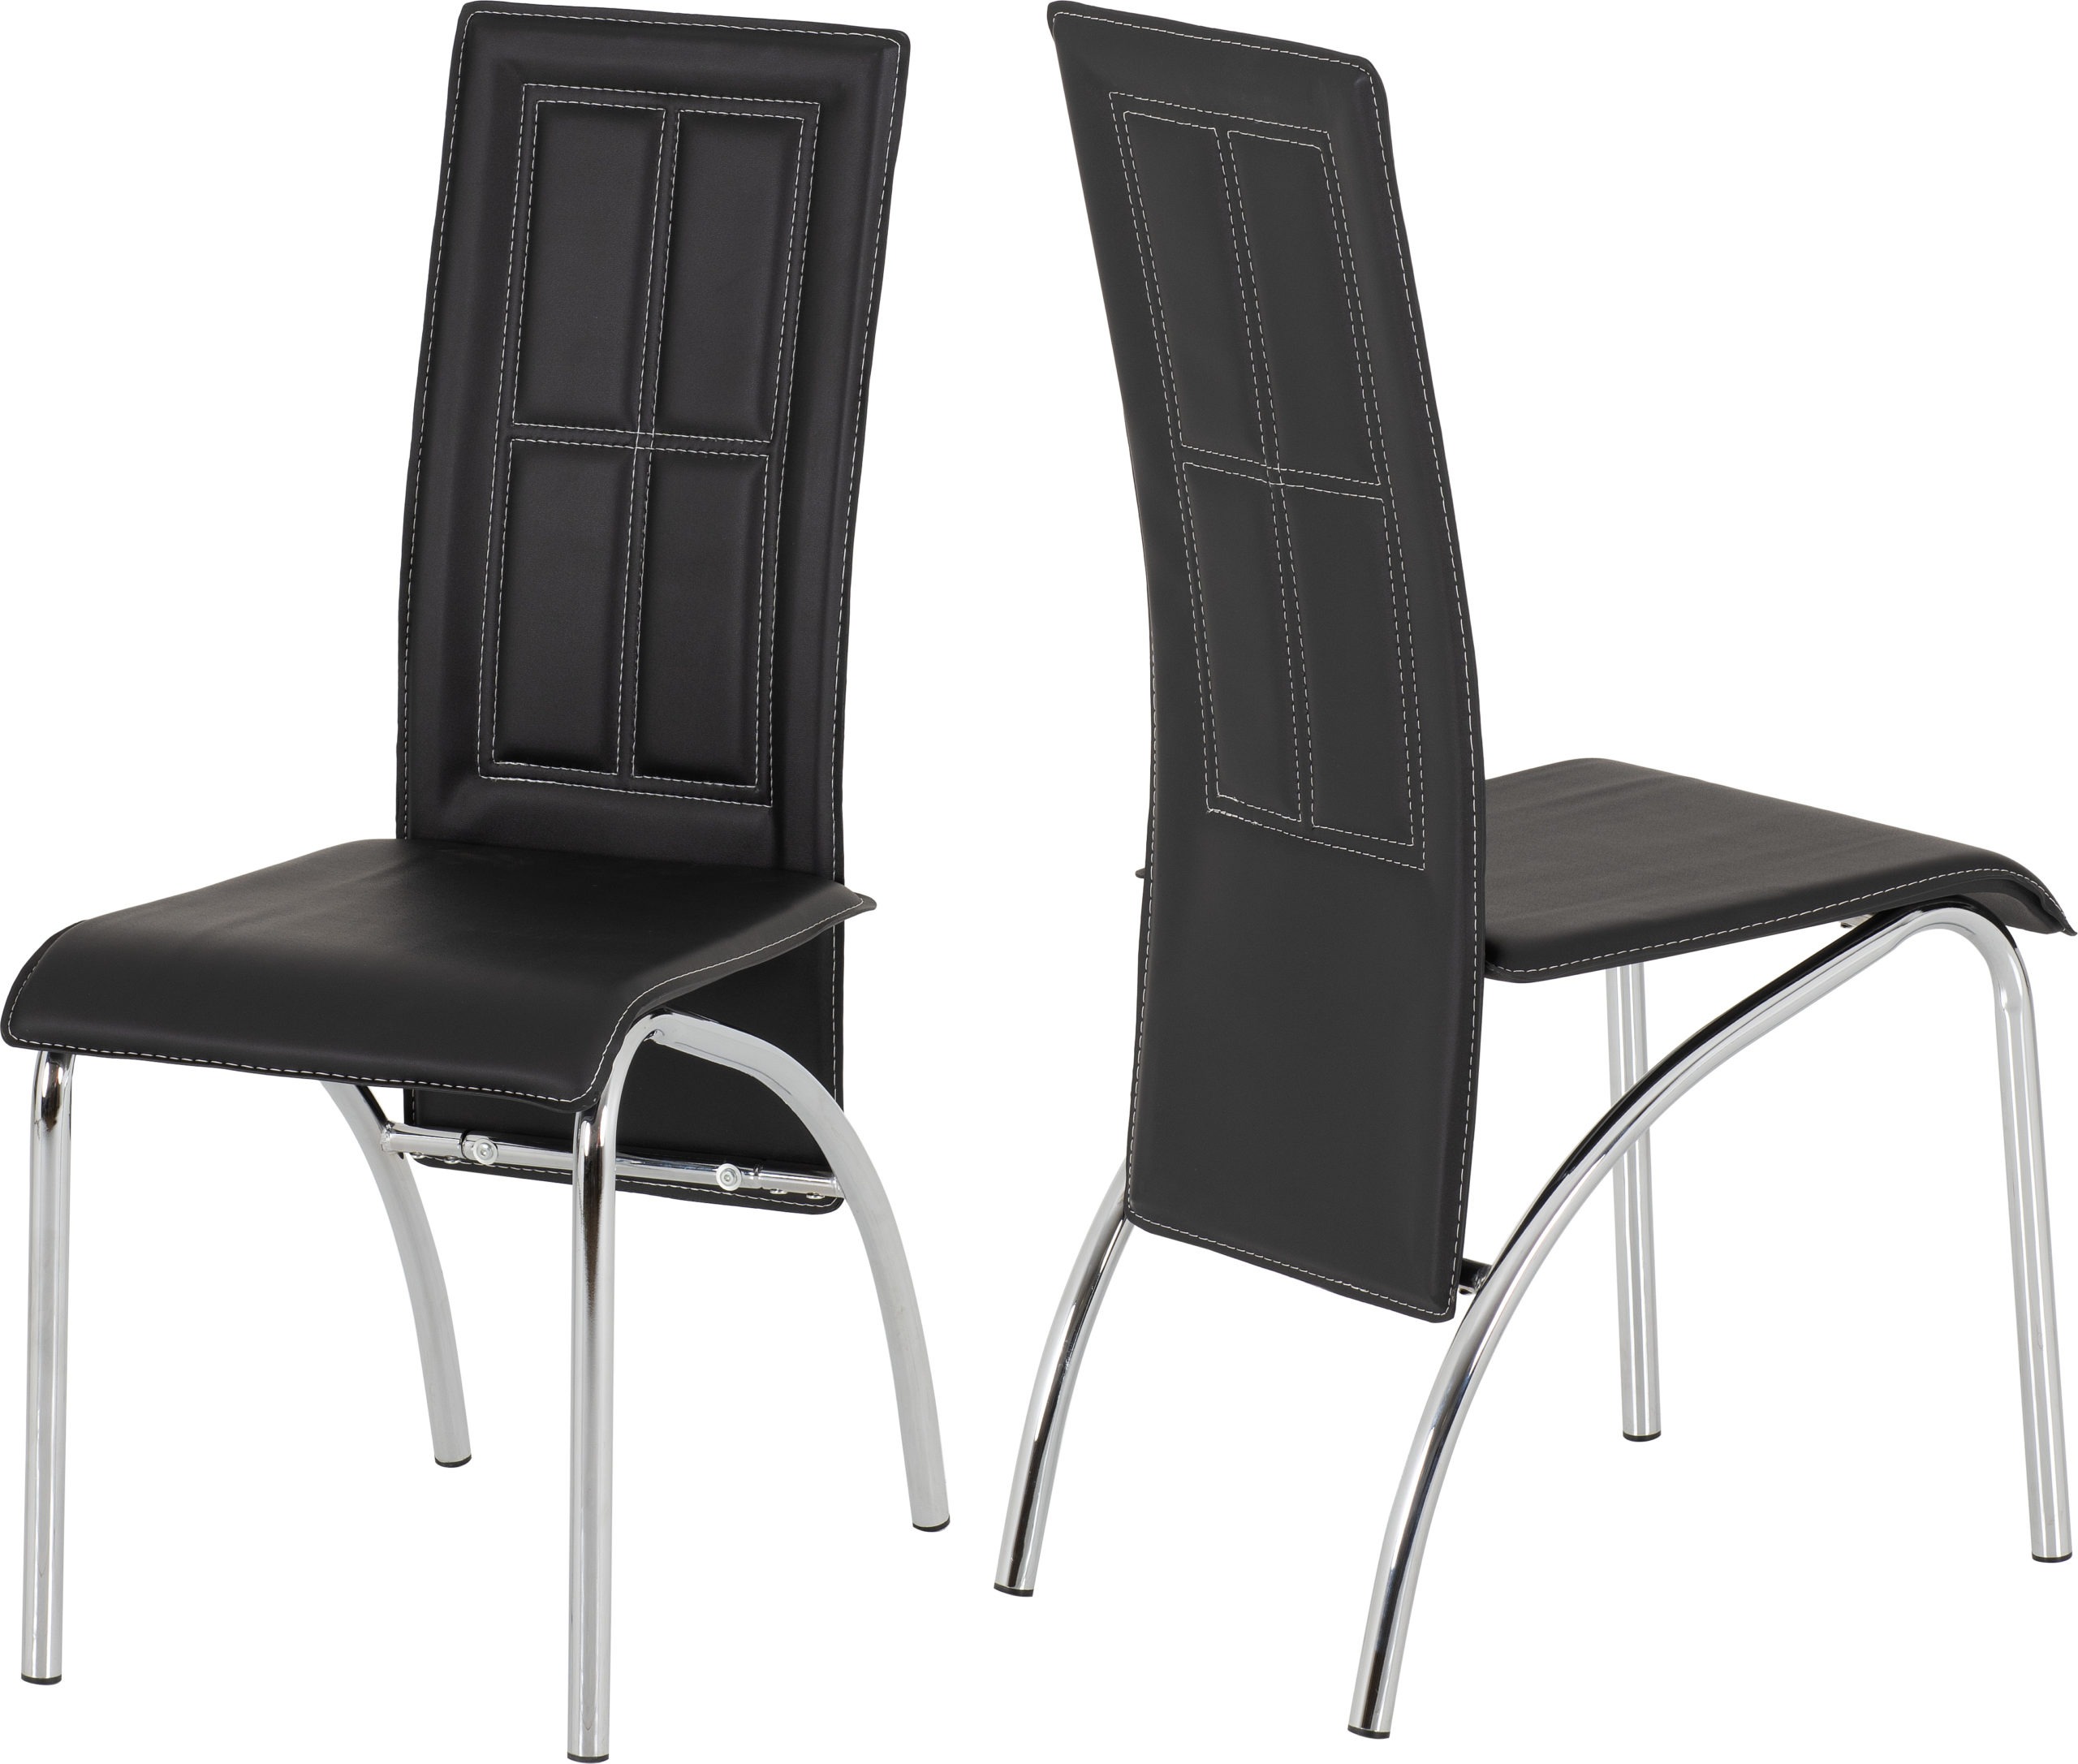 A3 Chair Black Faux Leather Chrome, Black Faux Leather And Chrome Dining Chairs